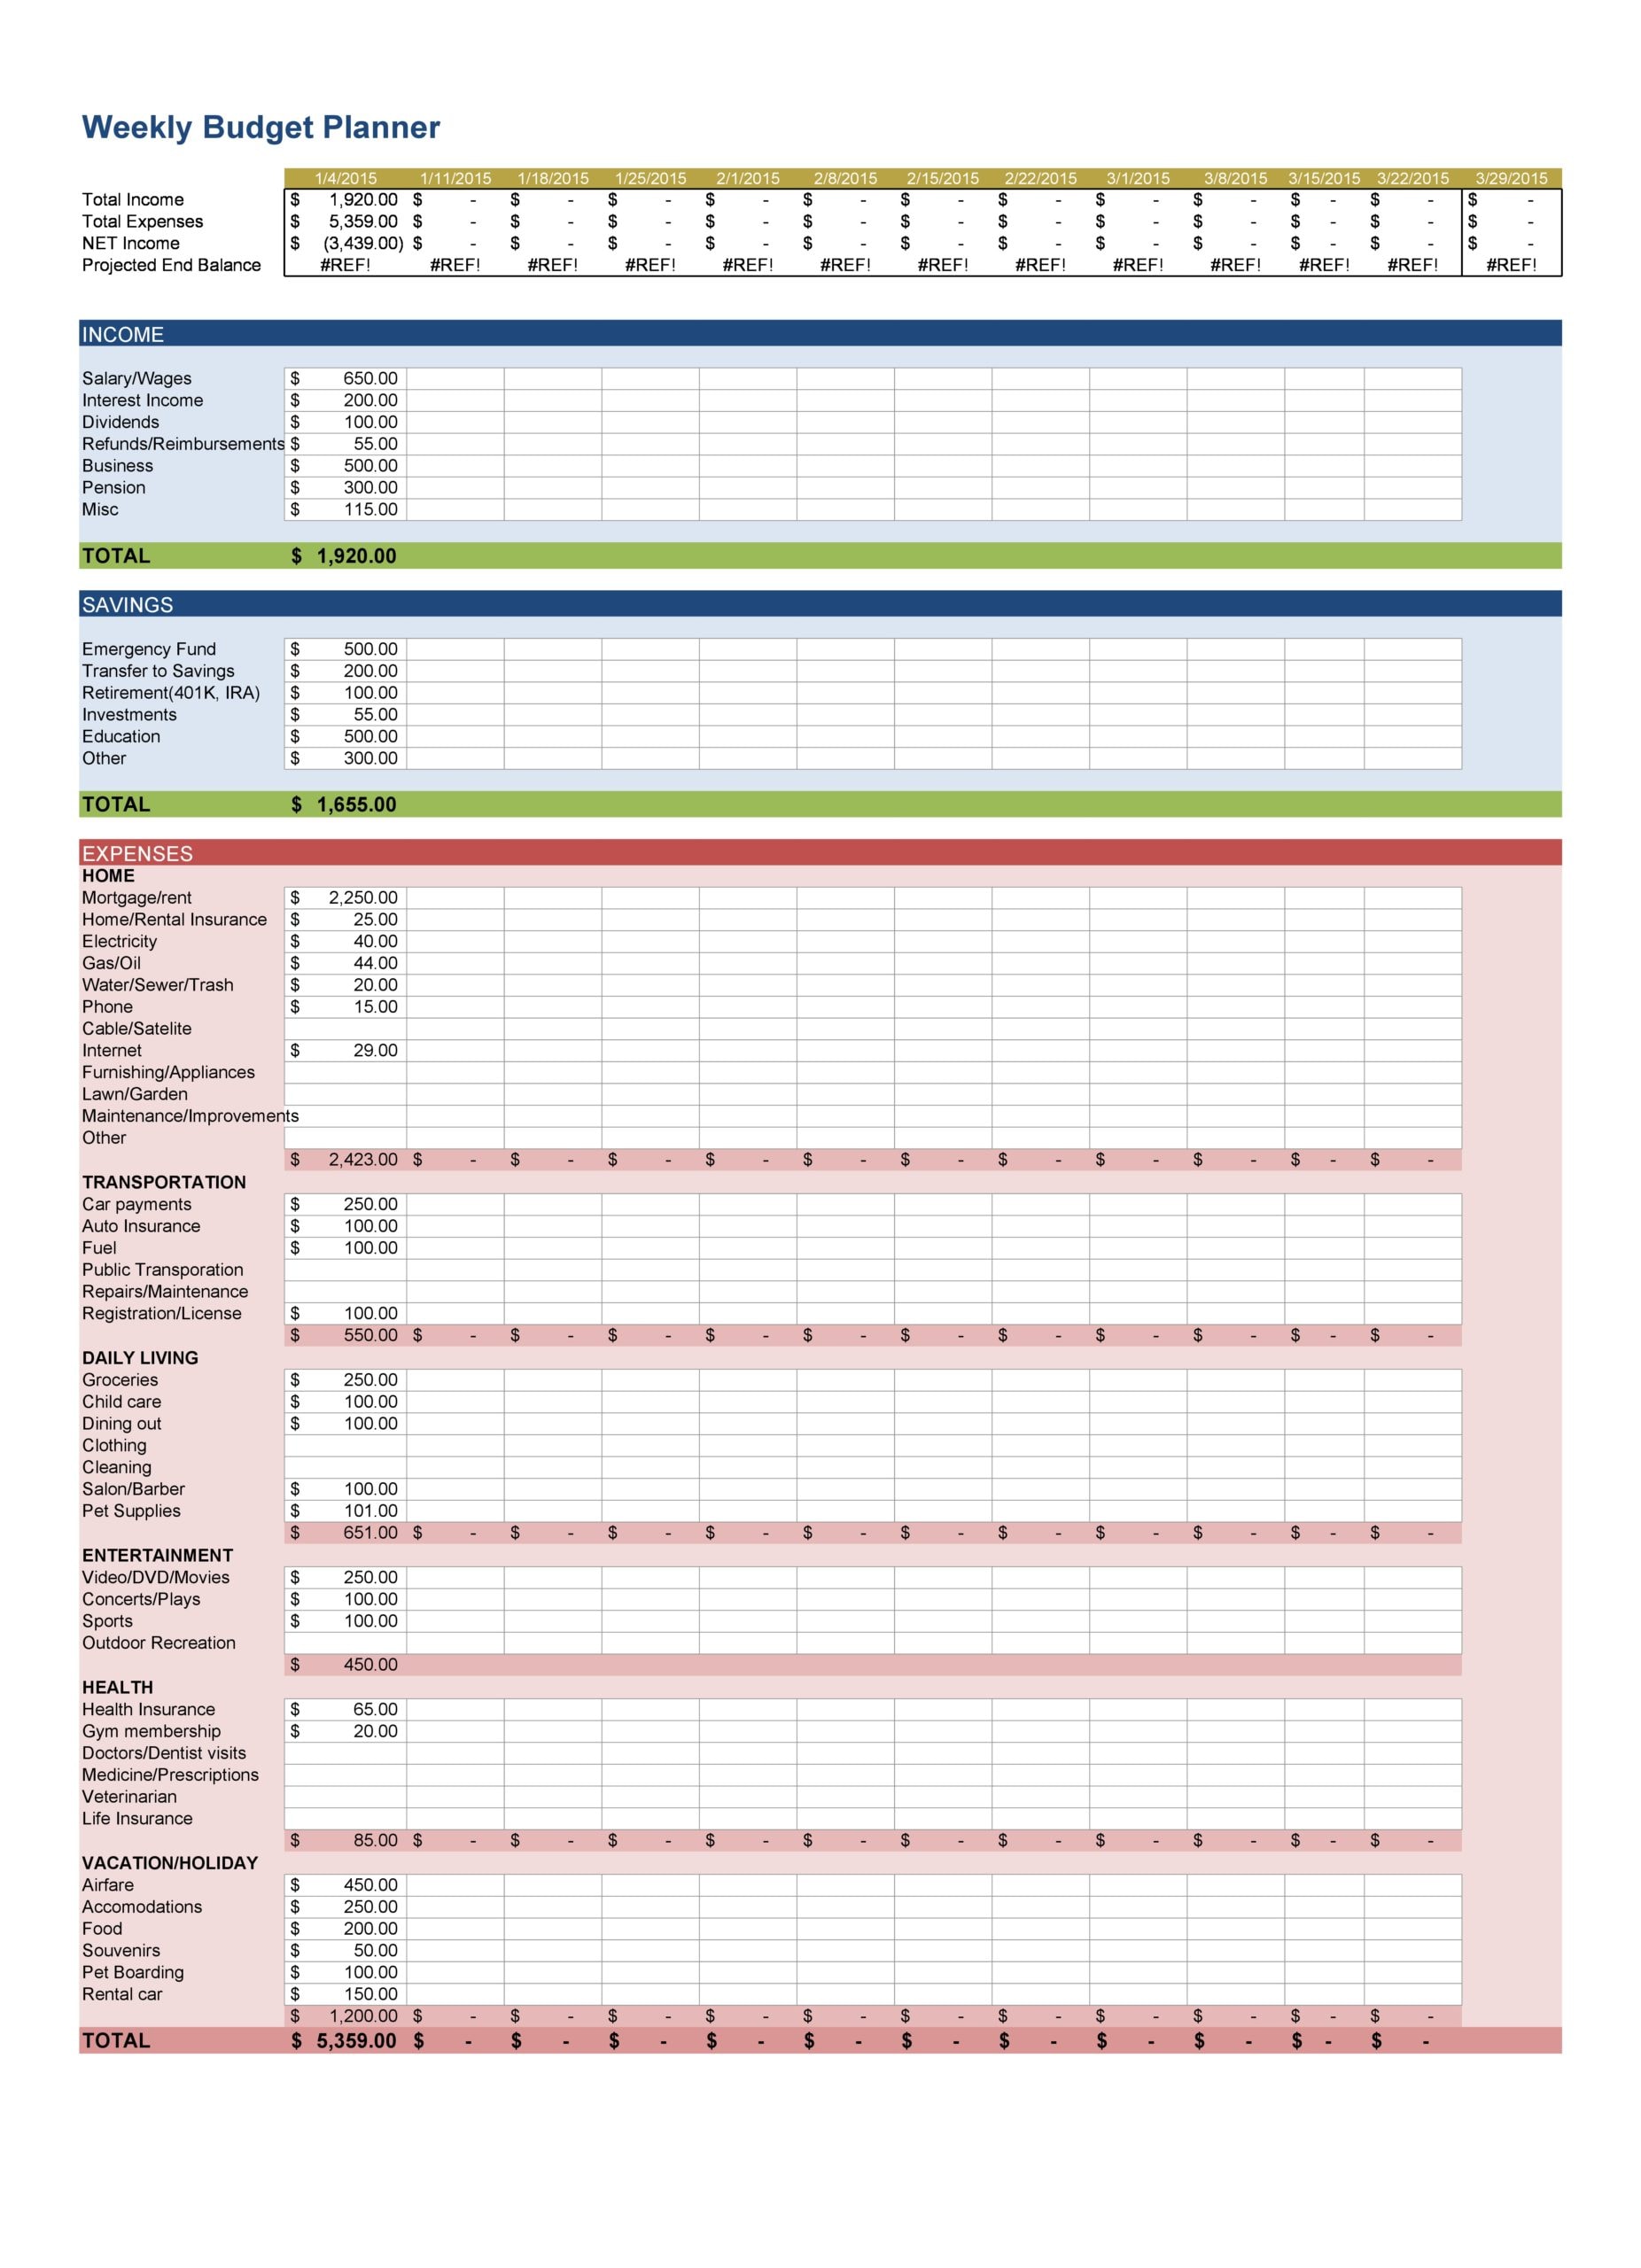 Excel Weekly Budget Template